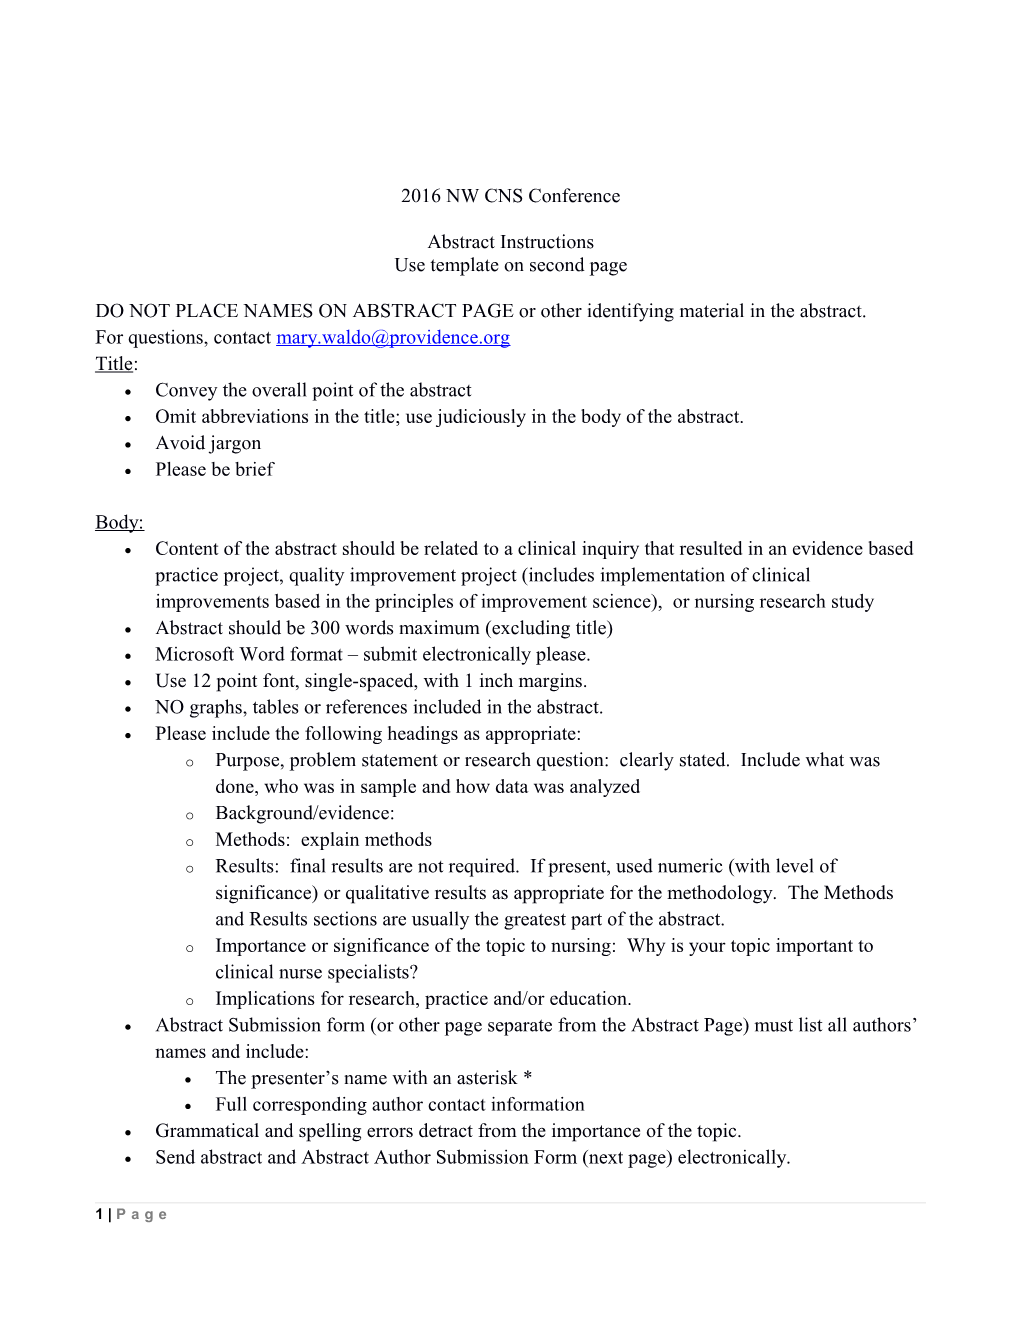 Oregon Nursing Research & Quality Consortium Abstract Instructions